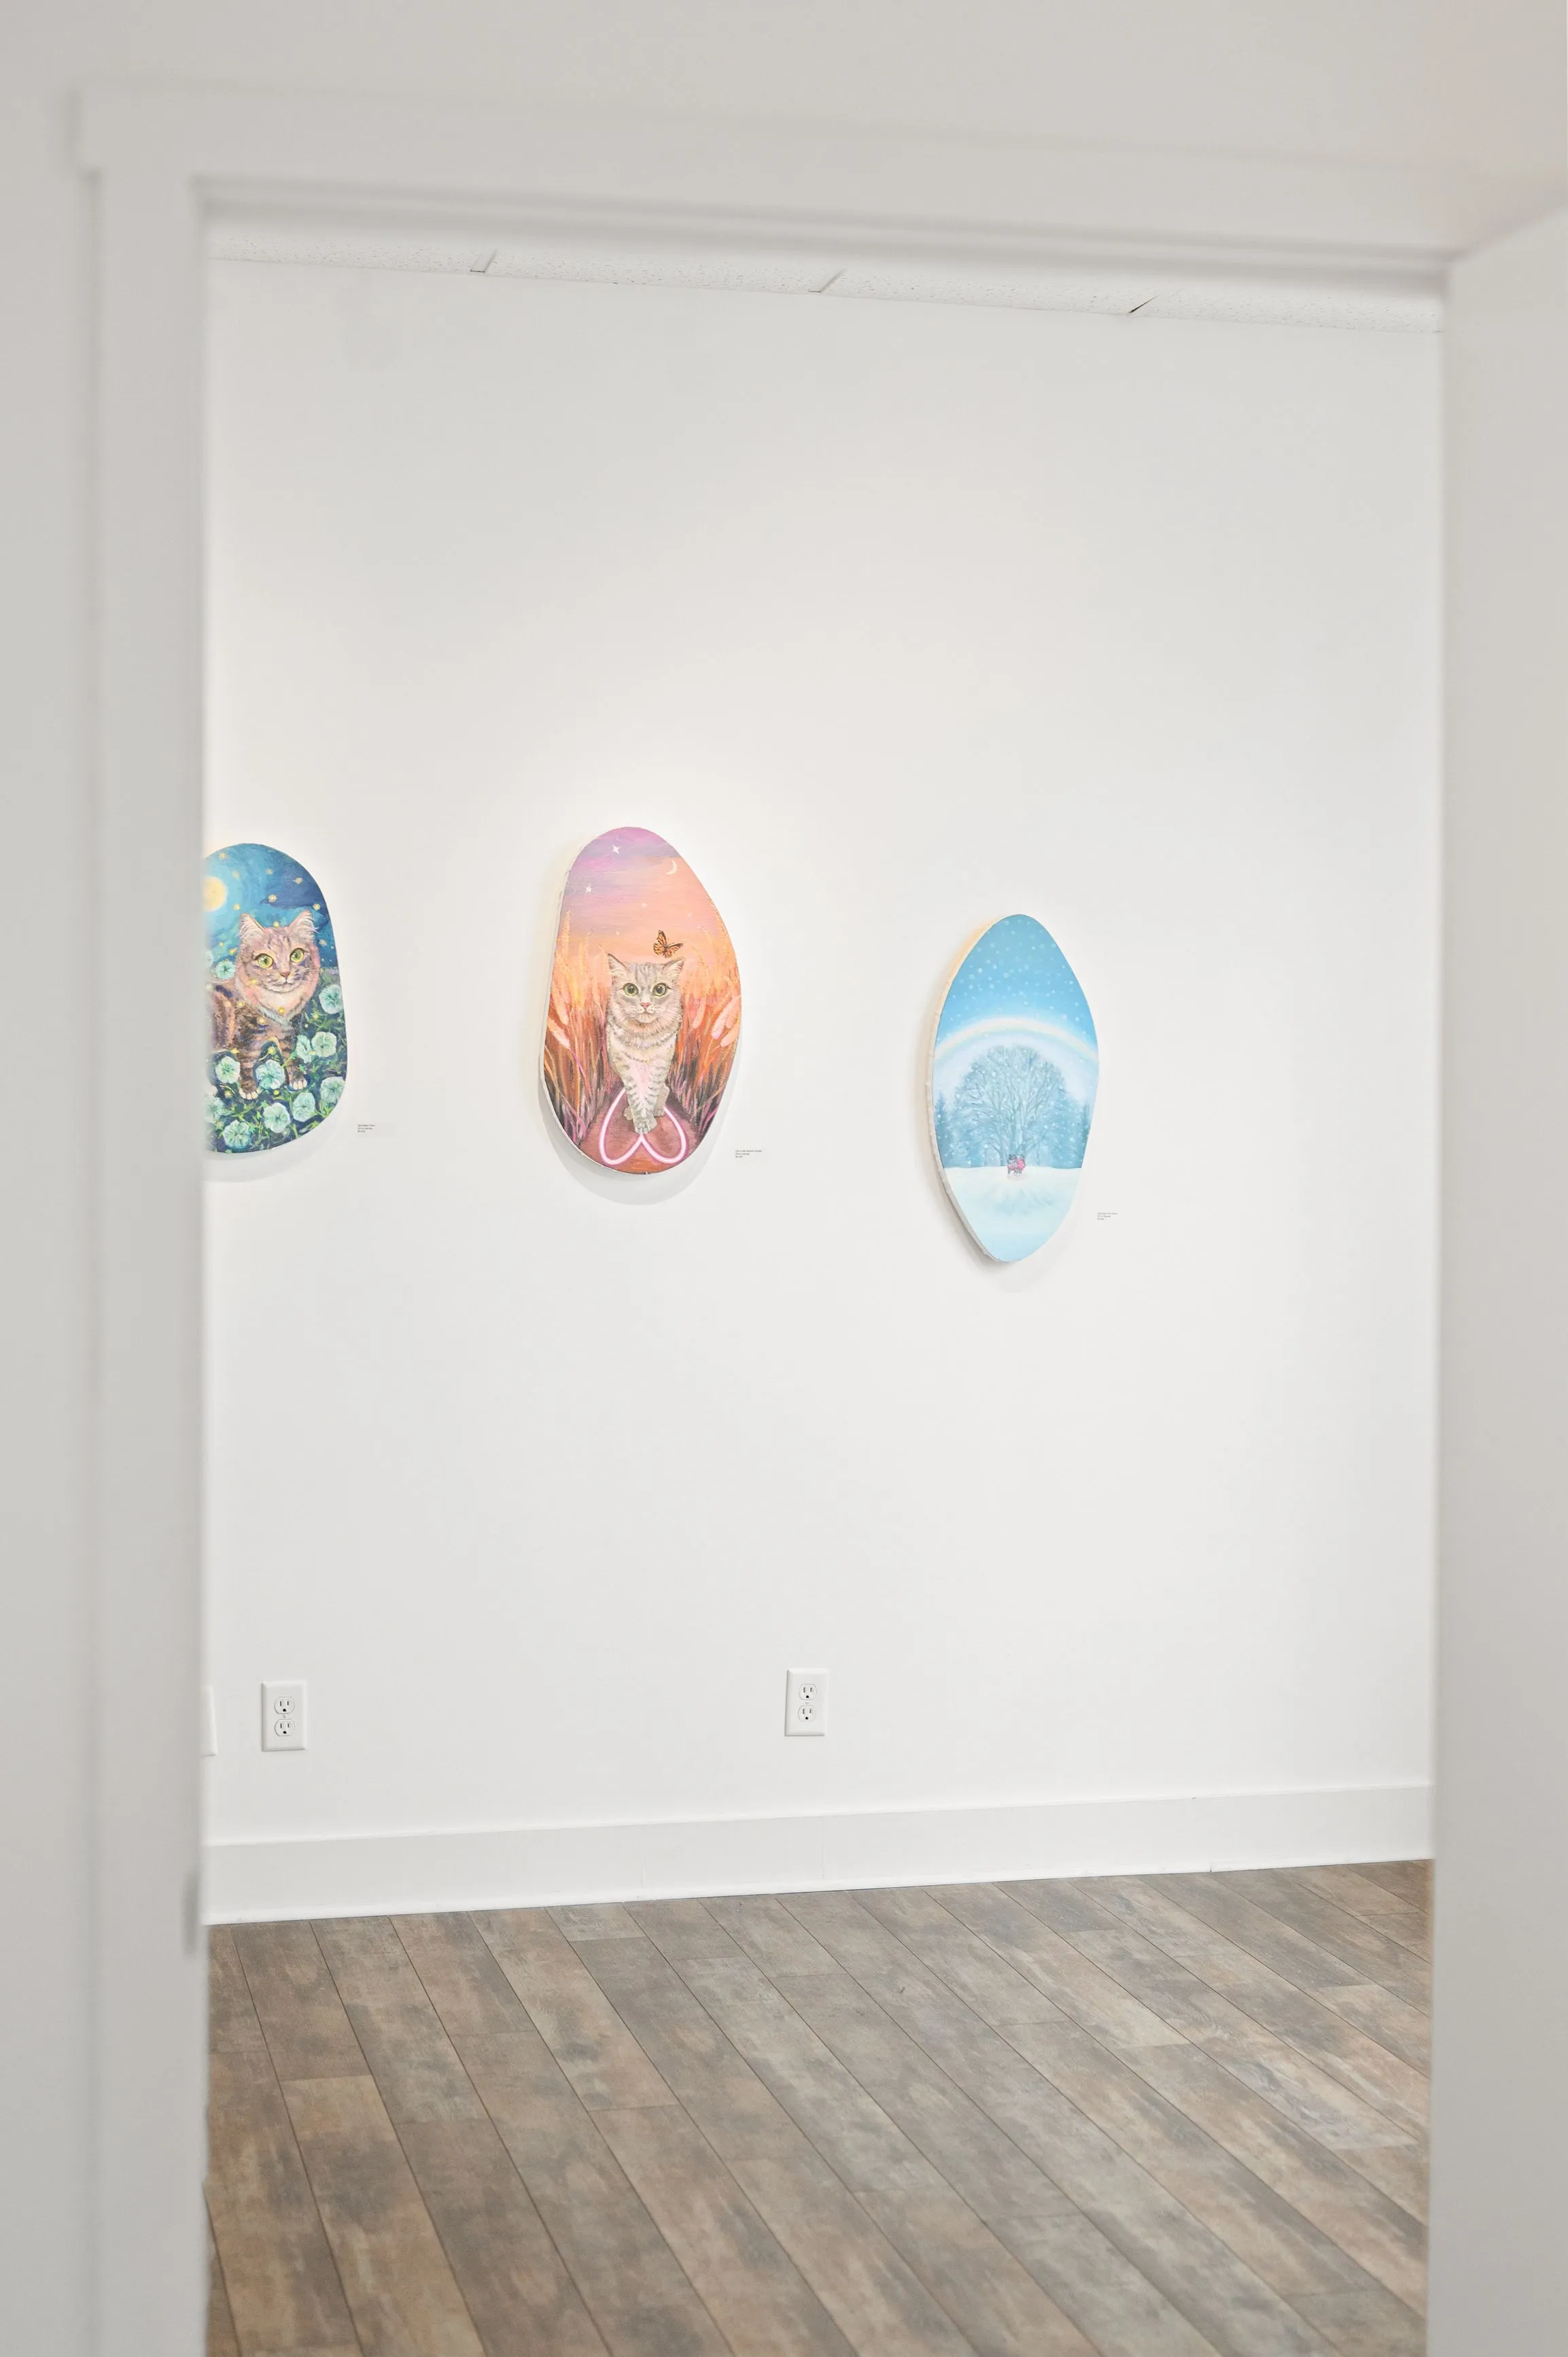 Three small, colorful abstract paintings displayed on a white wall in a bright room with wooden flooring.